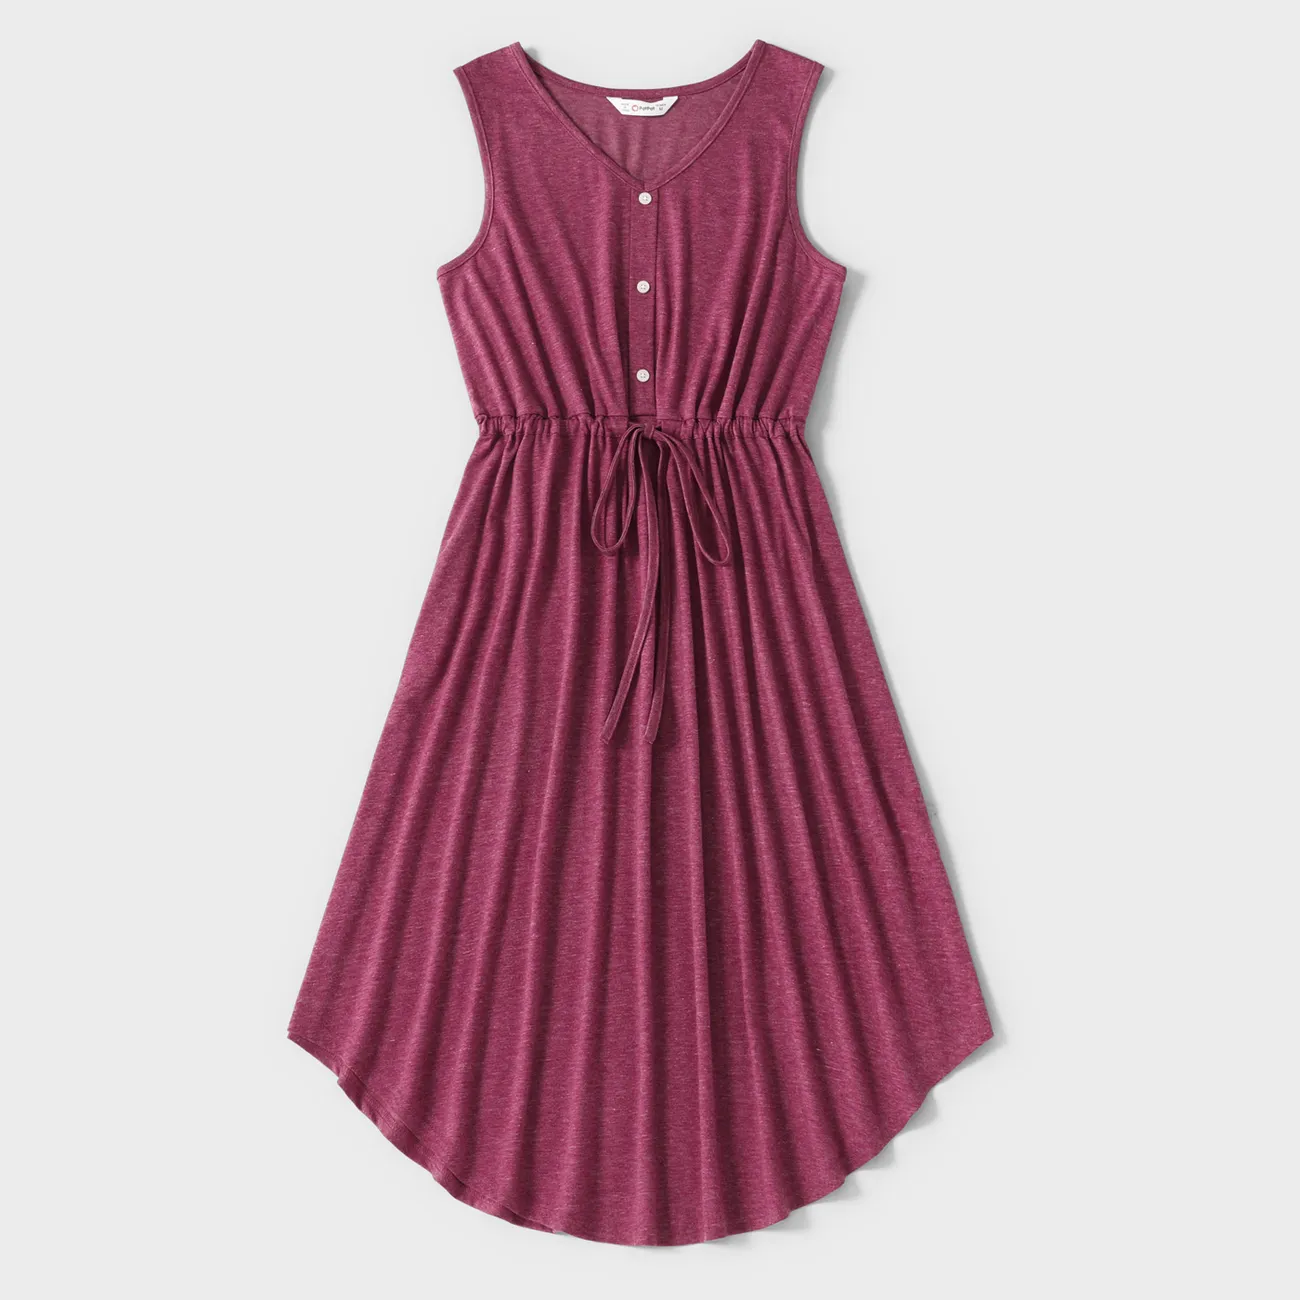 Family Matching Solid V Neck Sleeveless Button Up Drawstring Dresses and Striped Colorblock Short-sleeve T-shirts Sets deeppurple big image 1